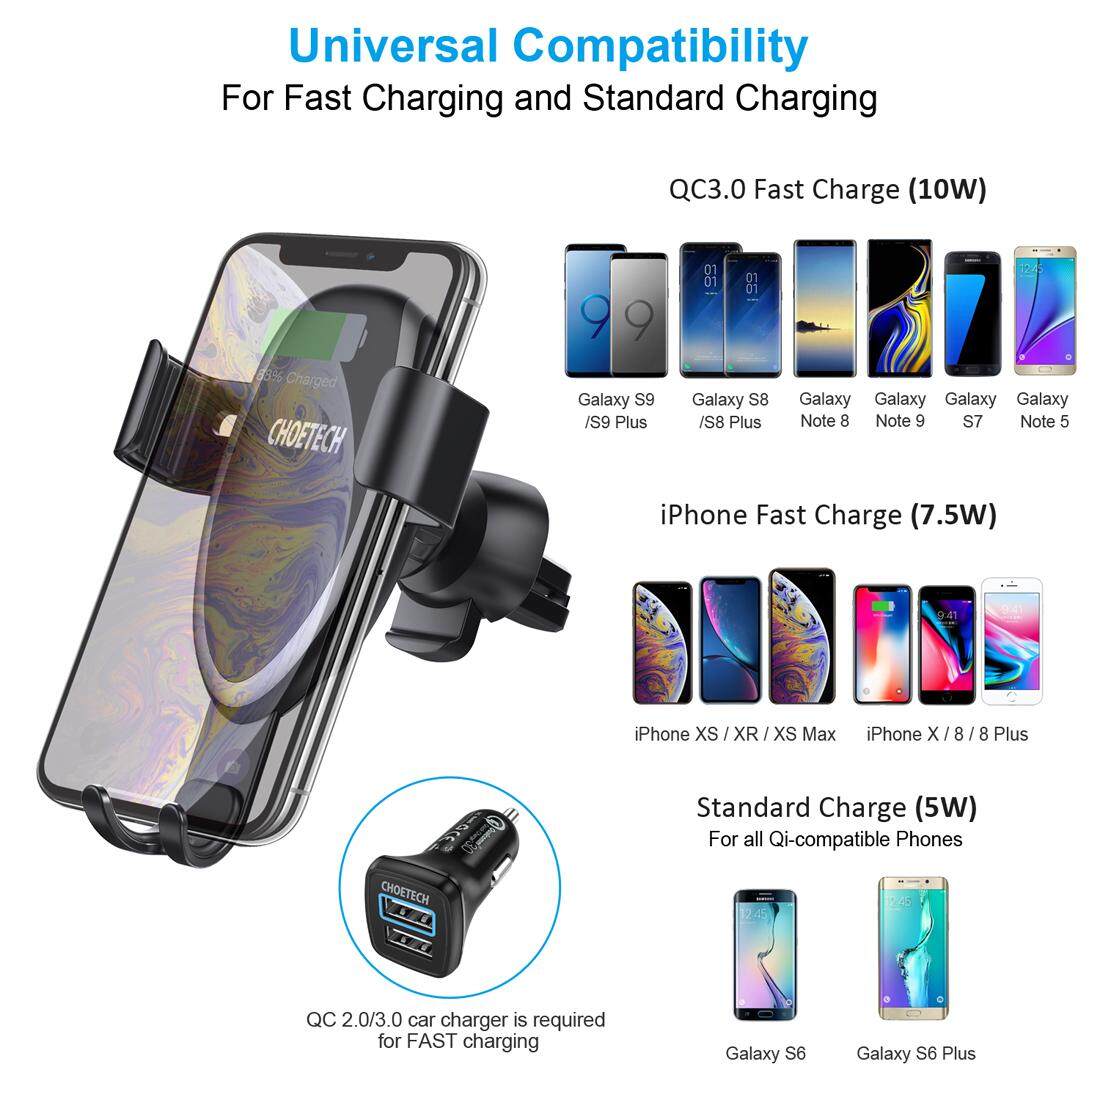 CHOETECH Wireless Car Charger Fast Gravity Wireless Car Charger Holder 7.5W Compatible with iPhone XR//XS//XS Max//X//8//8 Plus,10W for Galaxy Note 9//S9//S9+,S8//S8+//Note 8 5W for Huawei Mate 20 pro